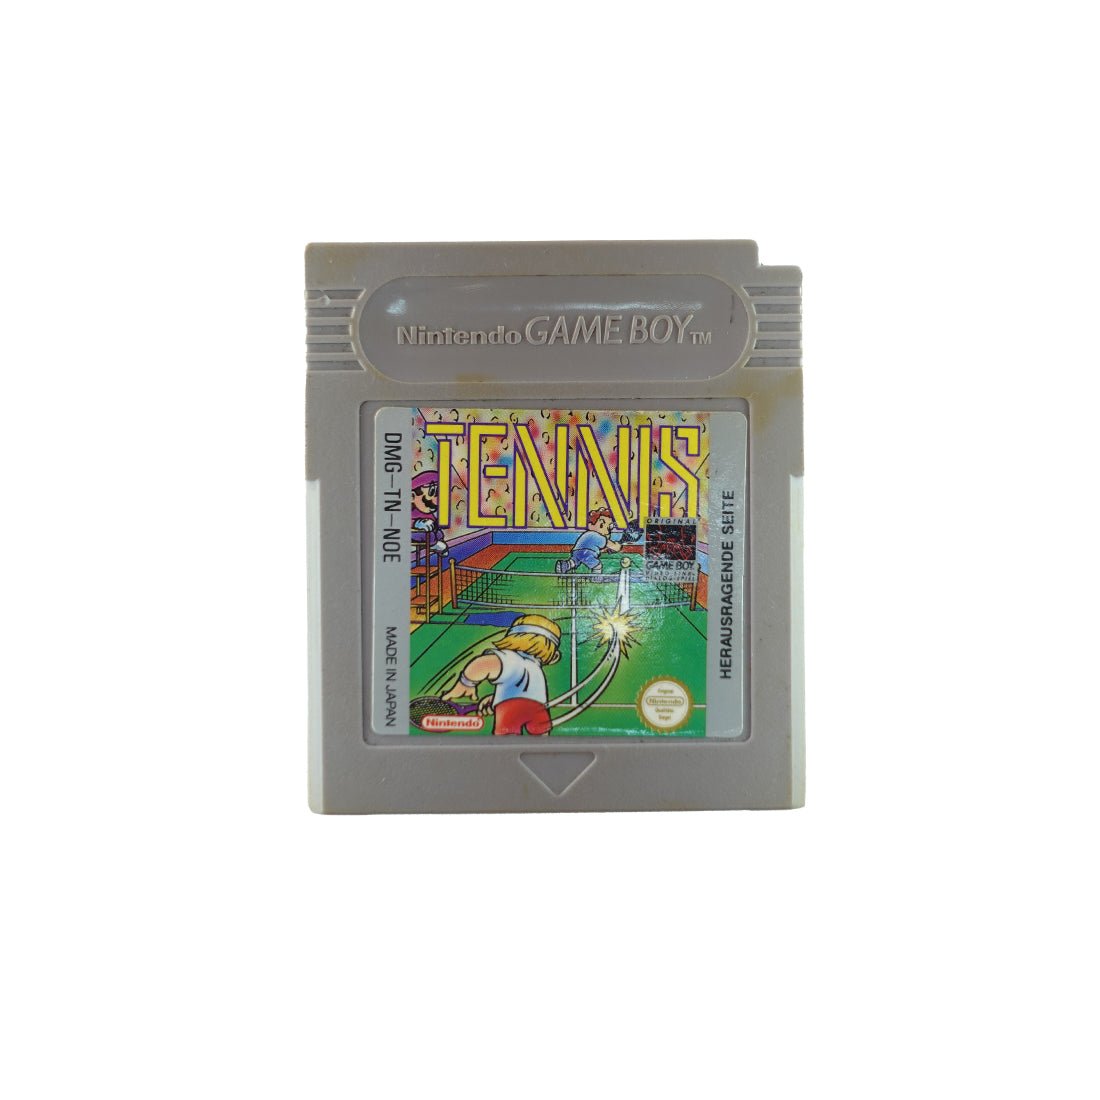 (Pre-Owned) Tennis - Gameboy Classic - ريترو - Store 974 | ستور ٩٧٤